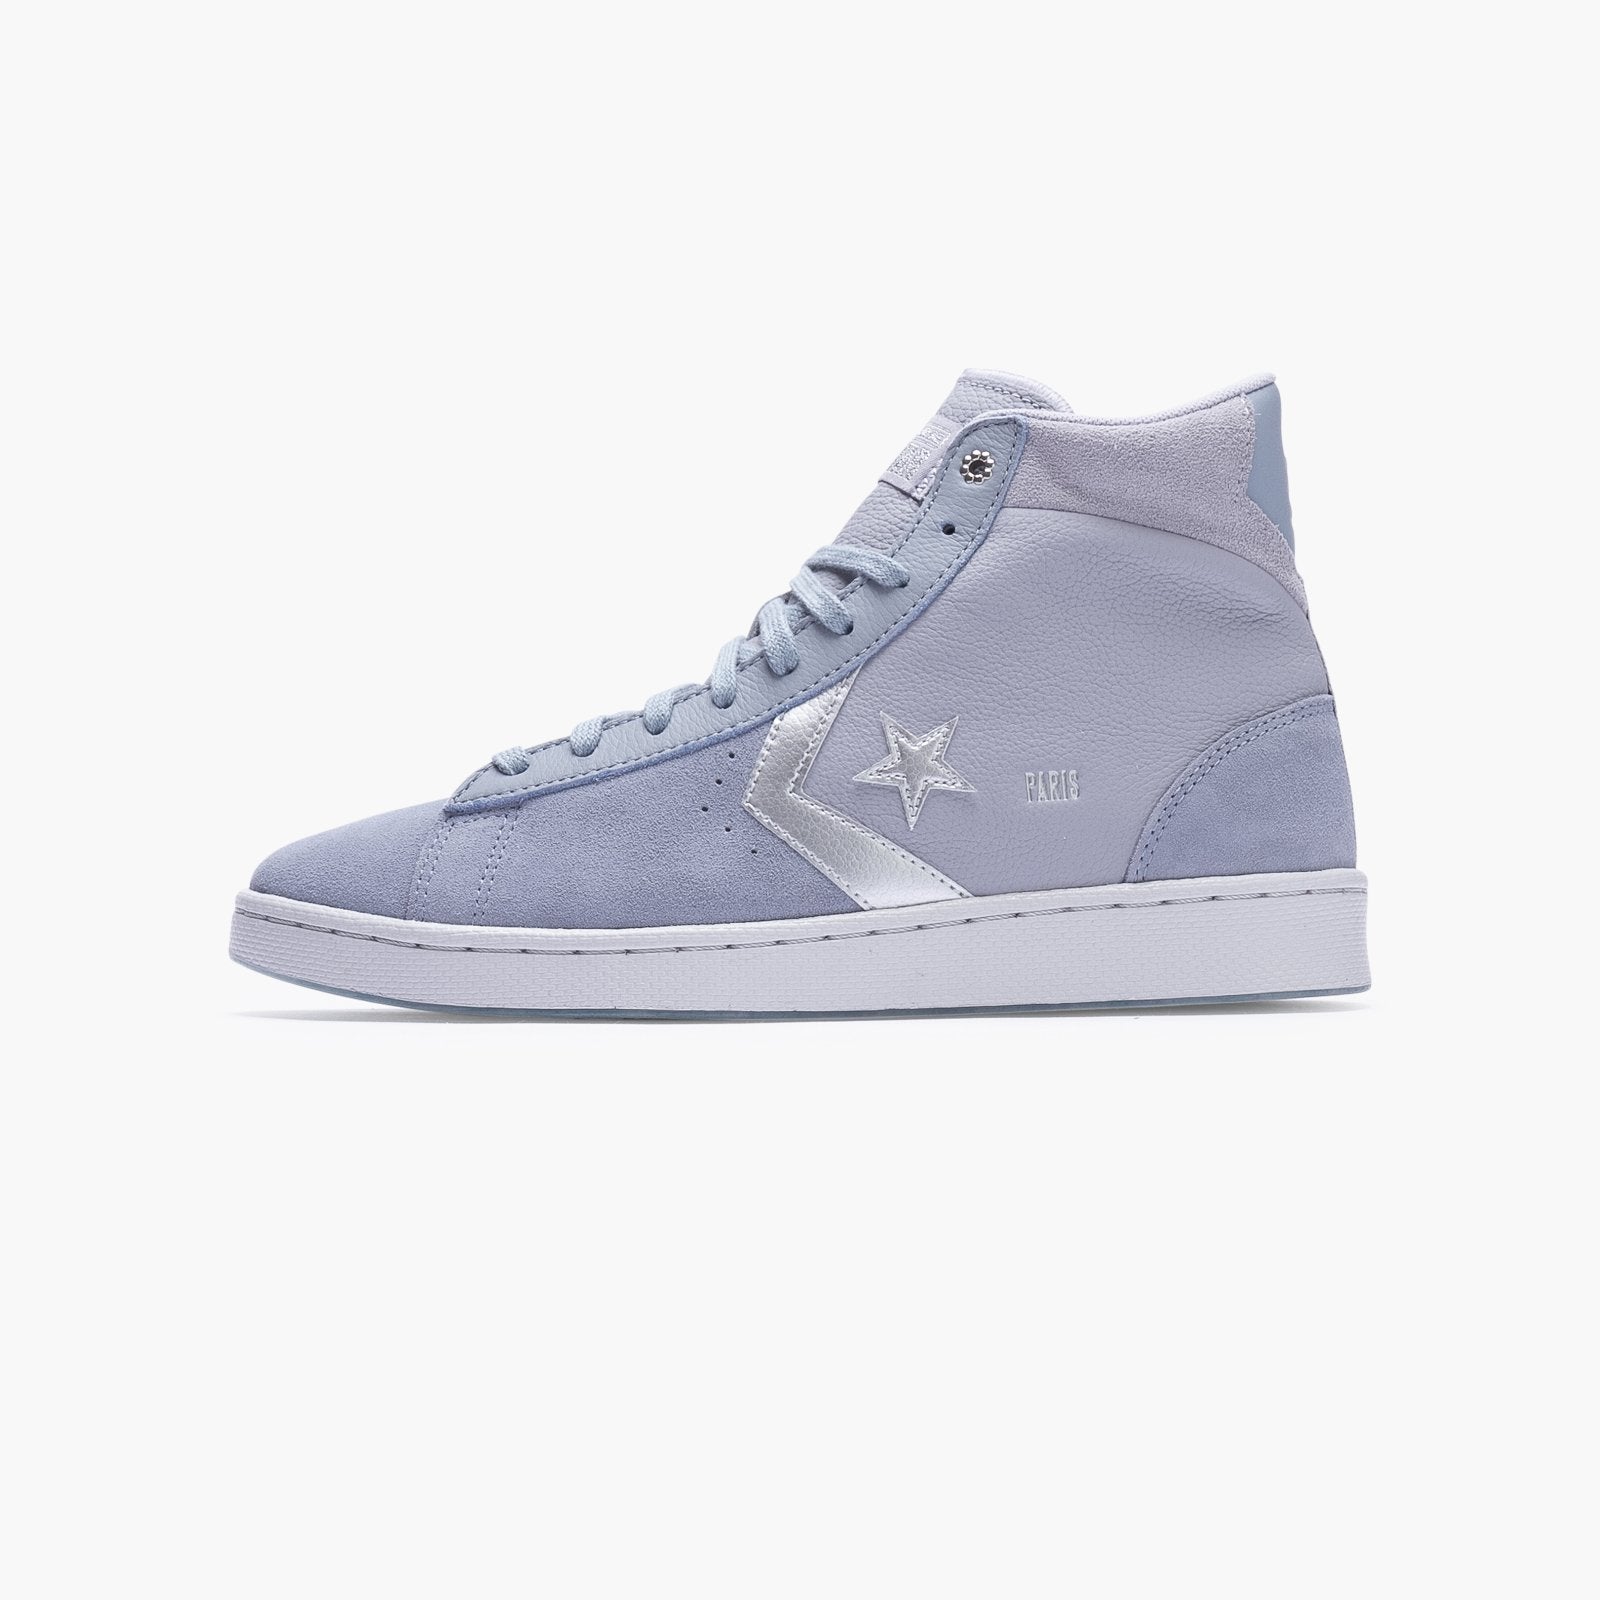 Converse Leather Hi now at SUEDE Store – SUEDE